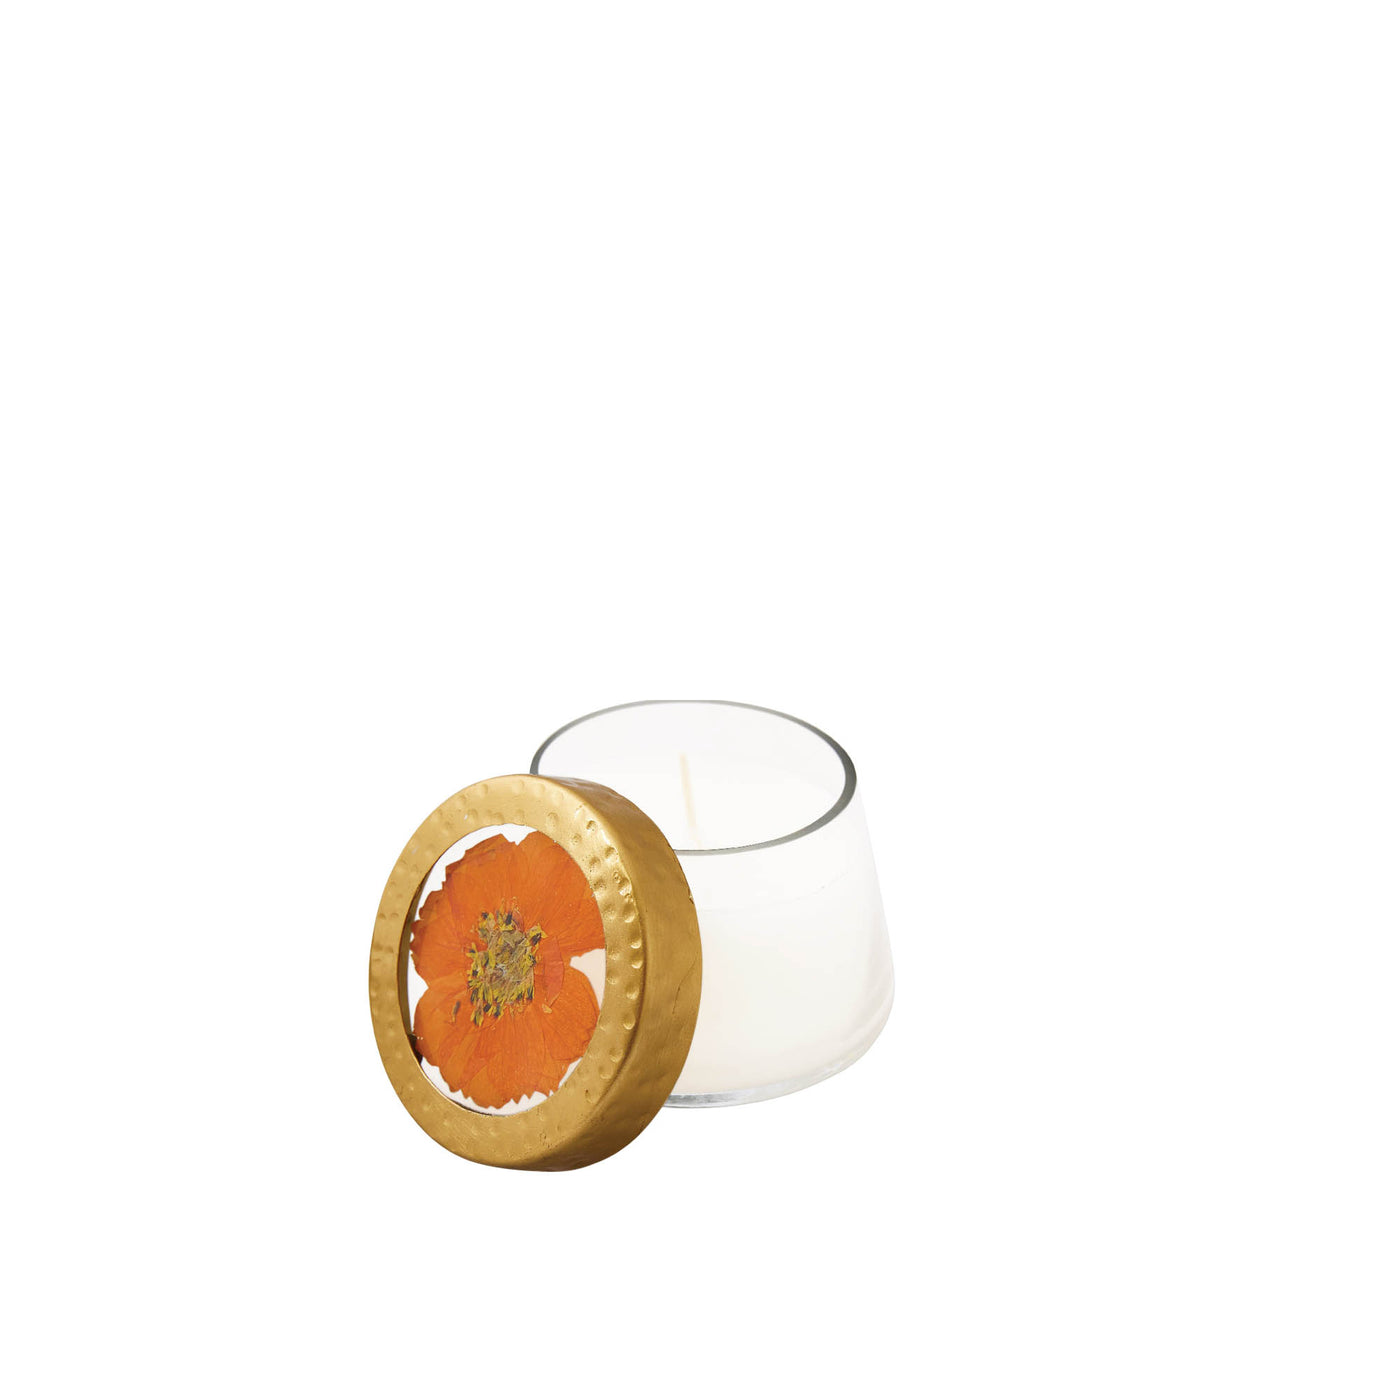 Sunlit Neroli Small Pressed Floral Candle